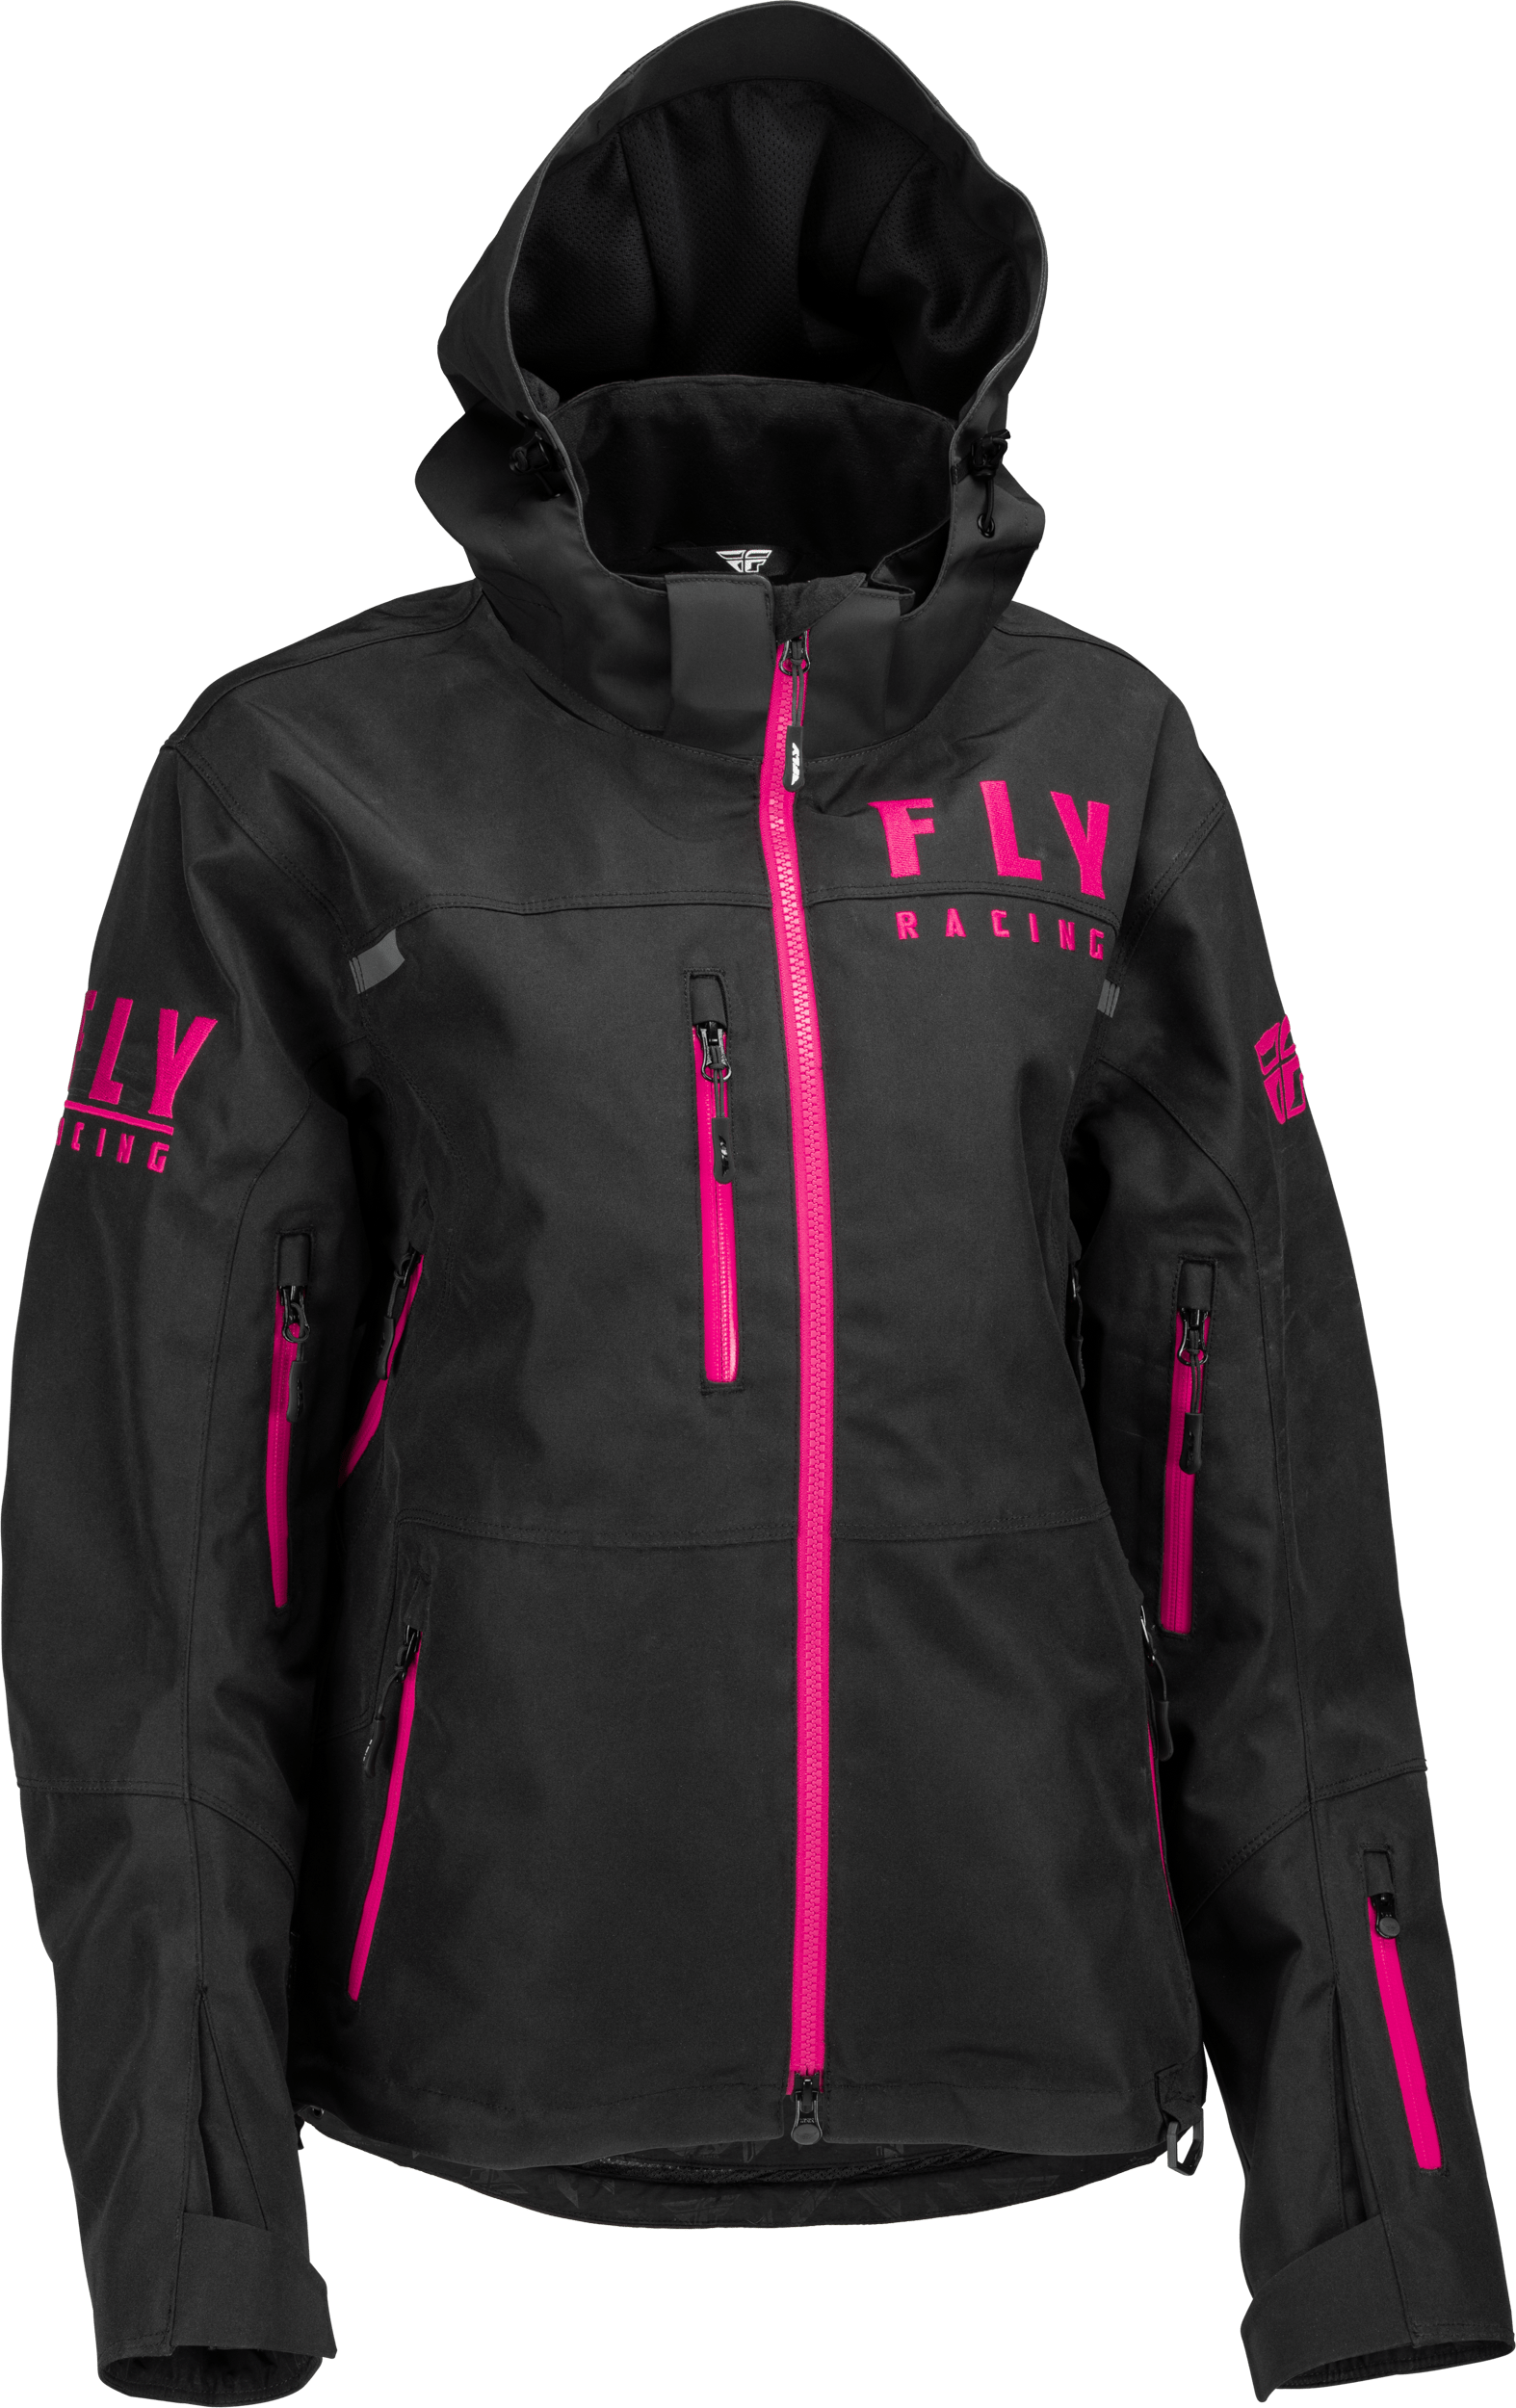 Western Powersports Jacket Black/Pink / 2X Women's Carbon Jacket By Fly Racing 470-45022X